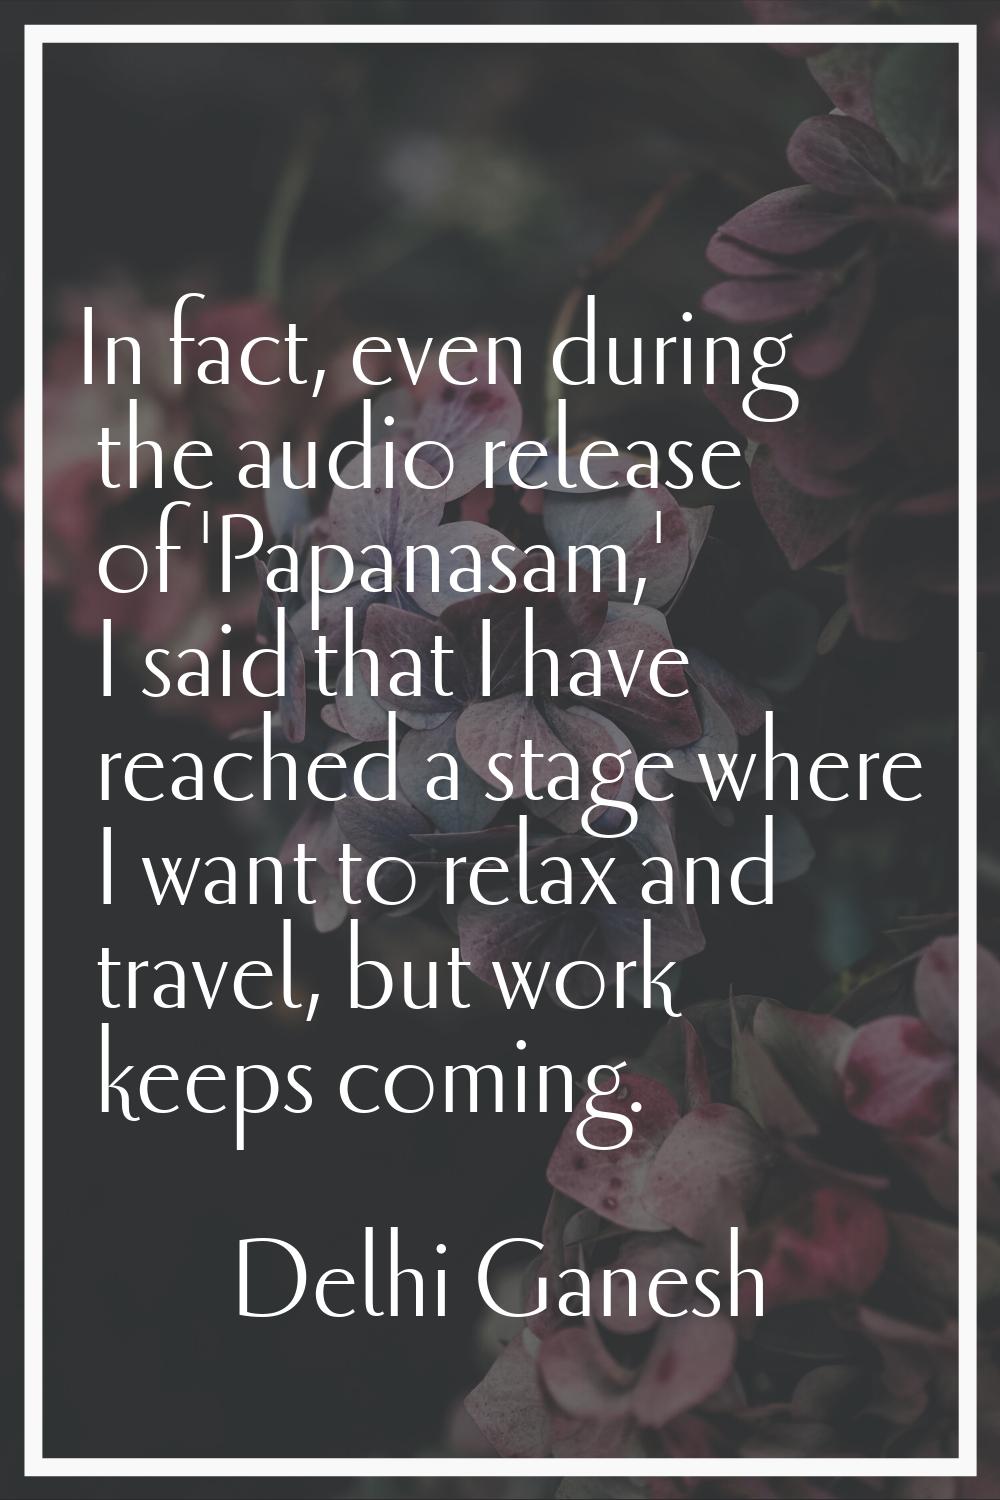 In fact, even during the audio release of 'Papanasam,' I said that I have reached a stage where I w